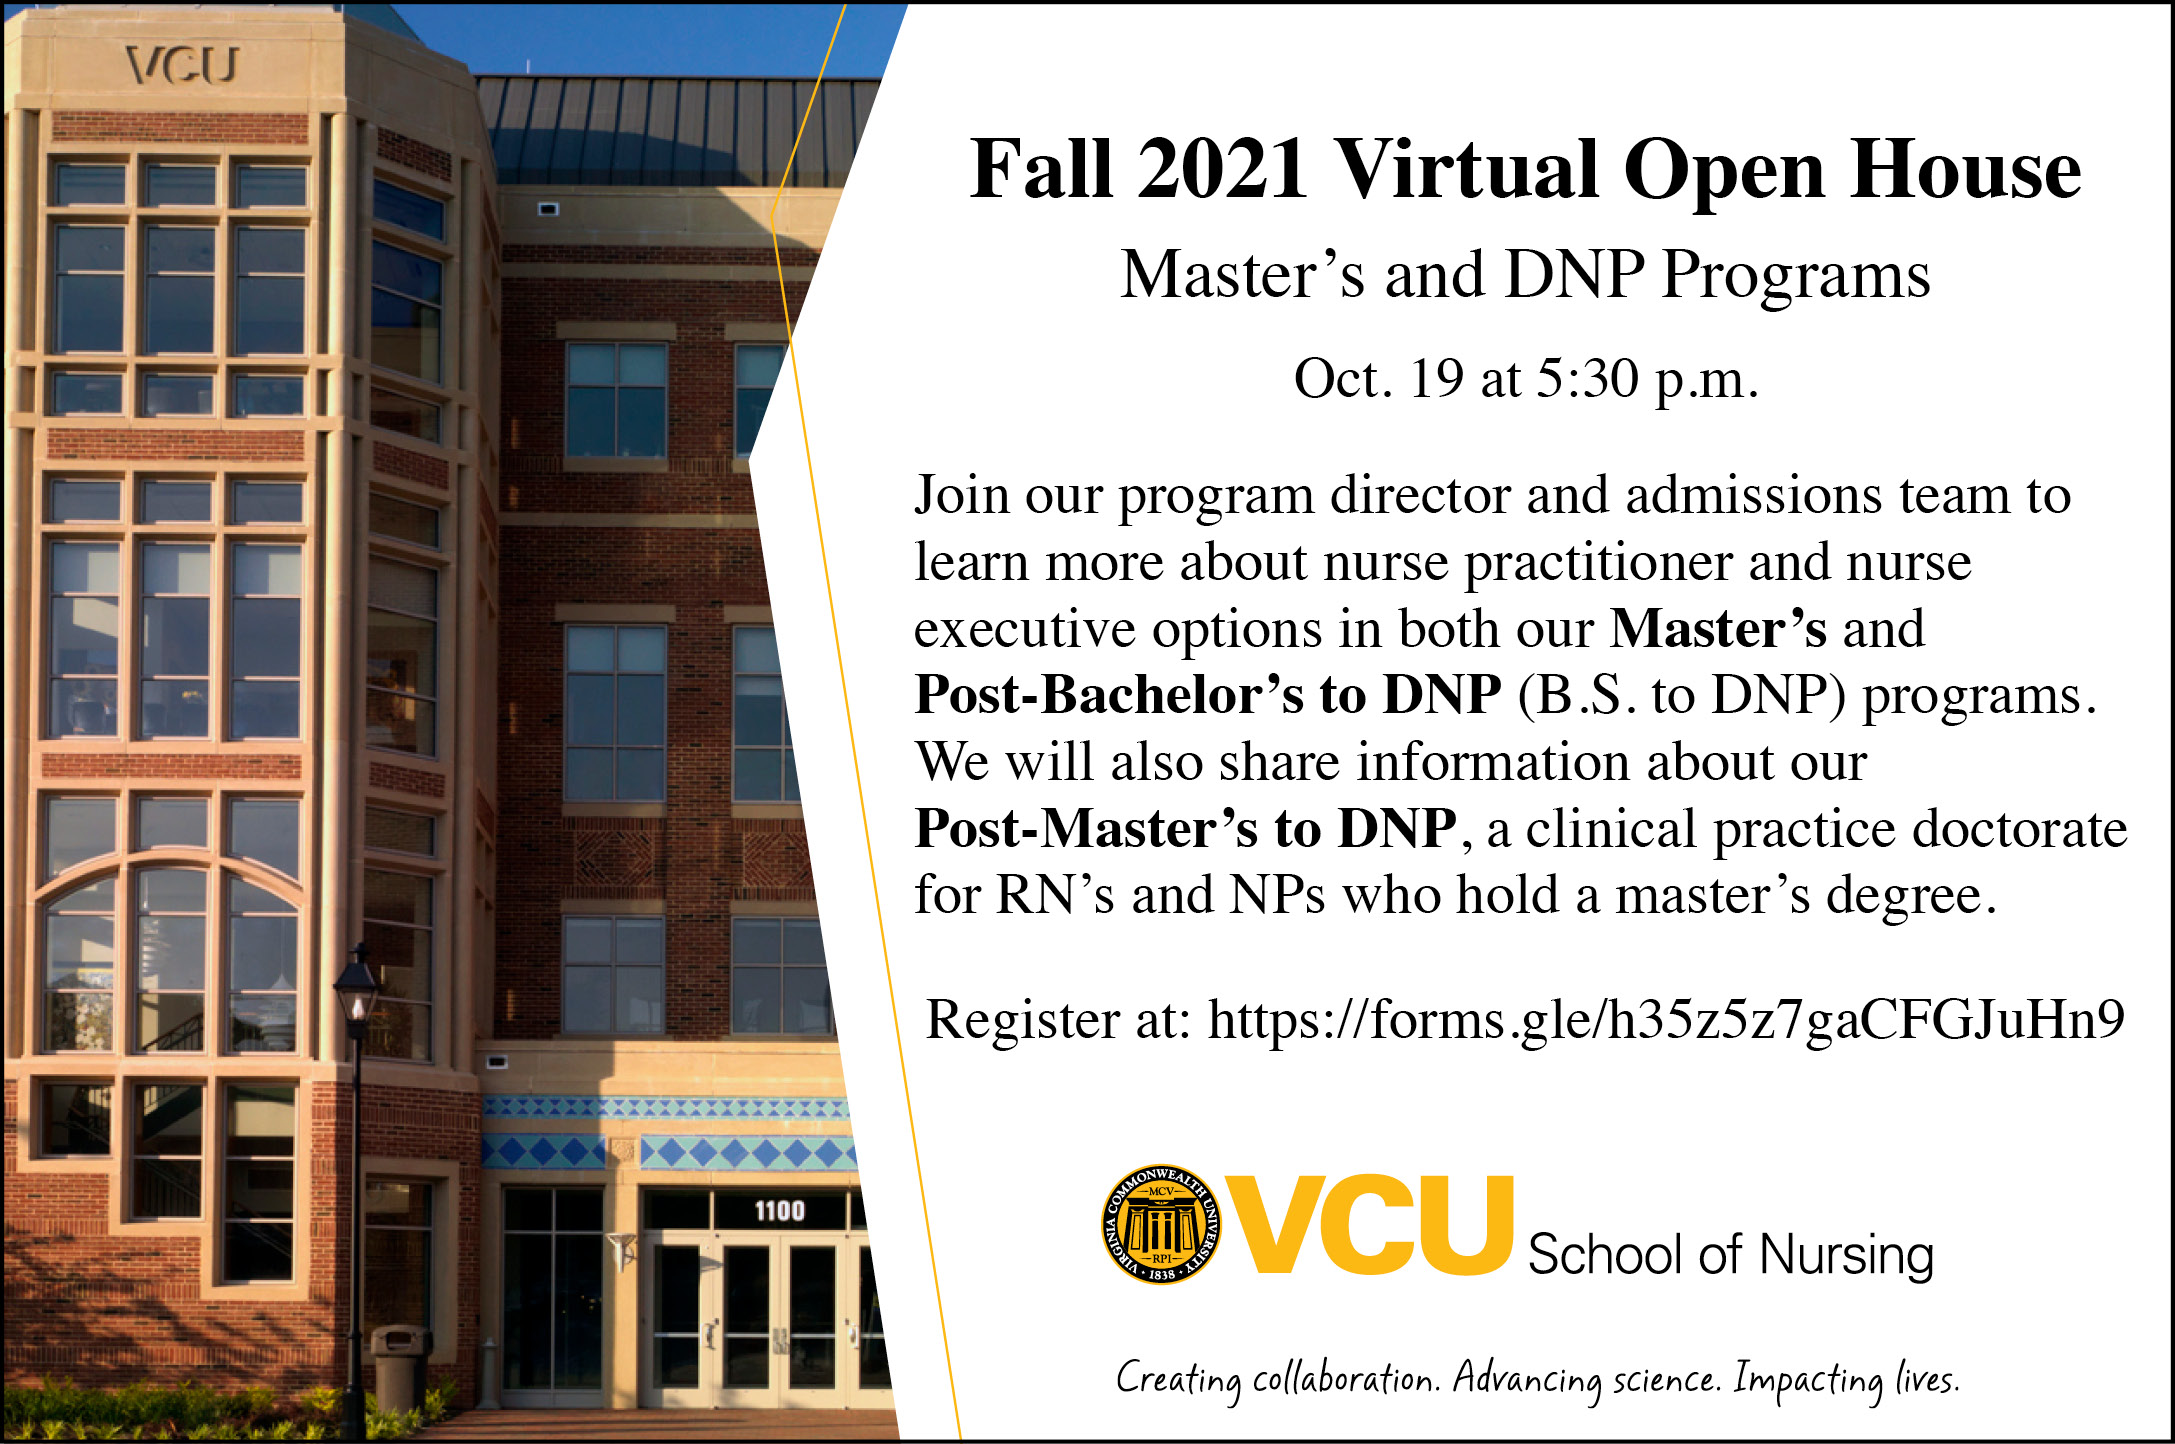 Fall Virtual Open House for Master’s and DNP Programs VCU School of